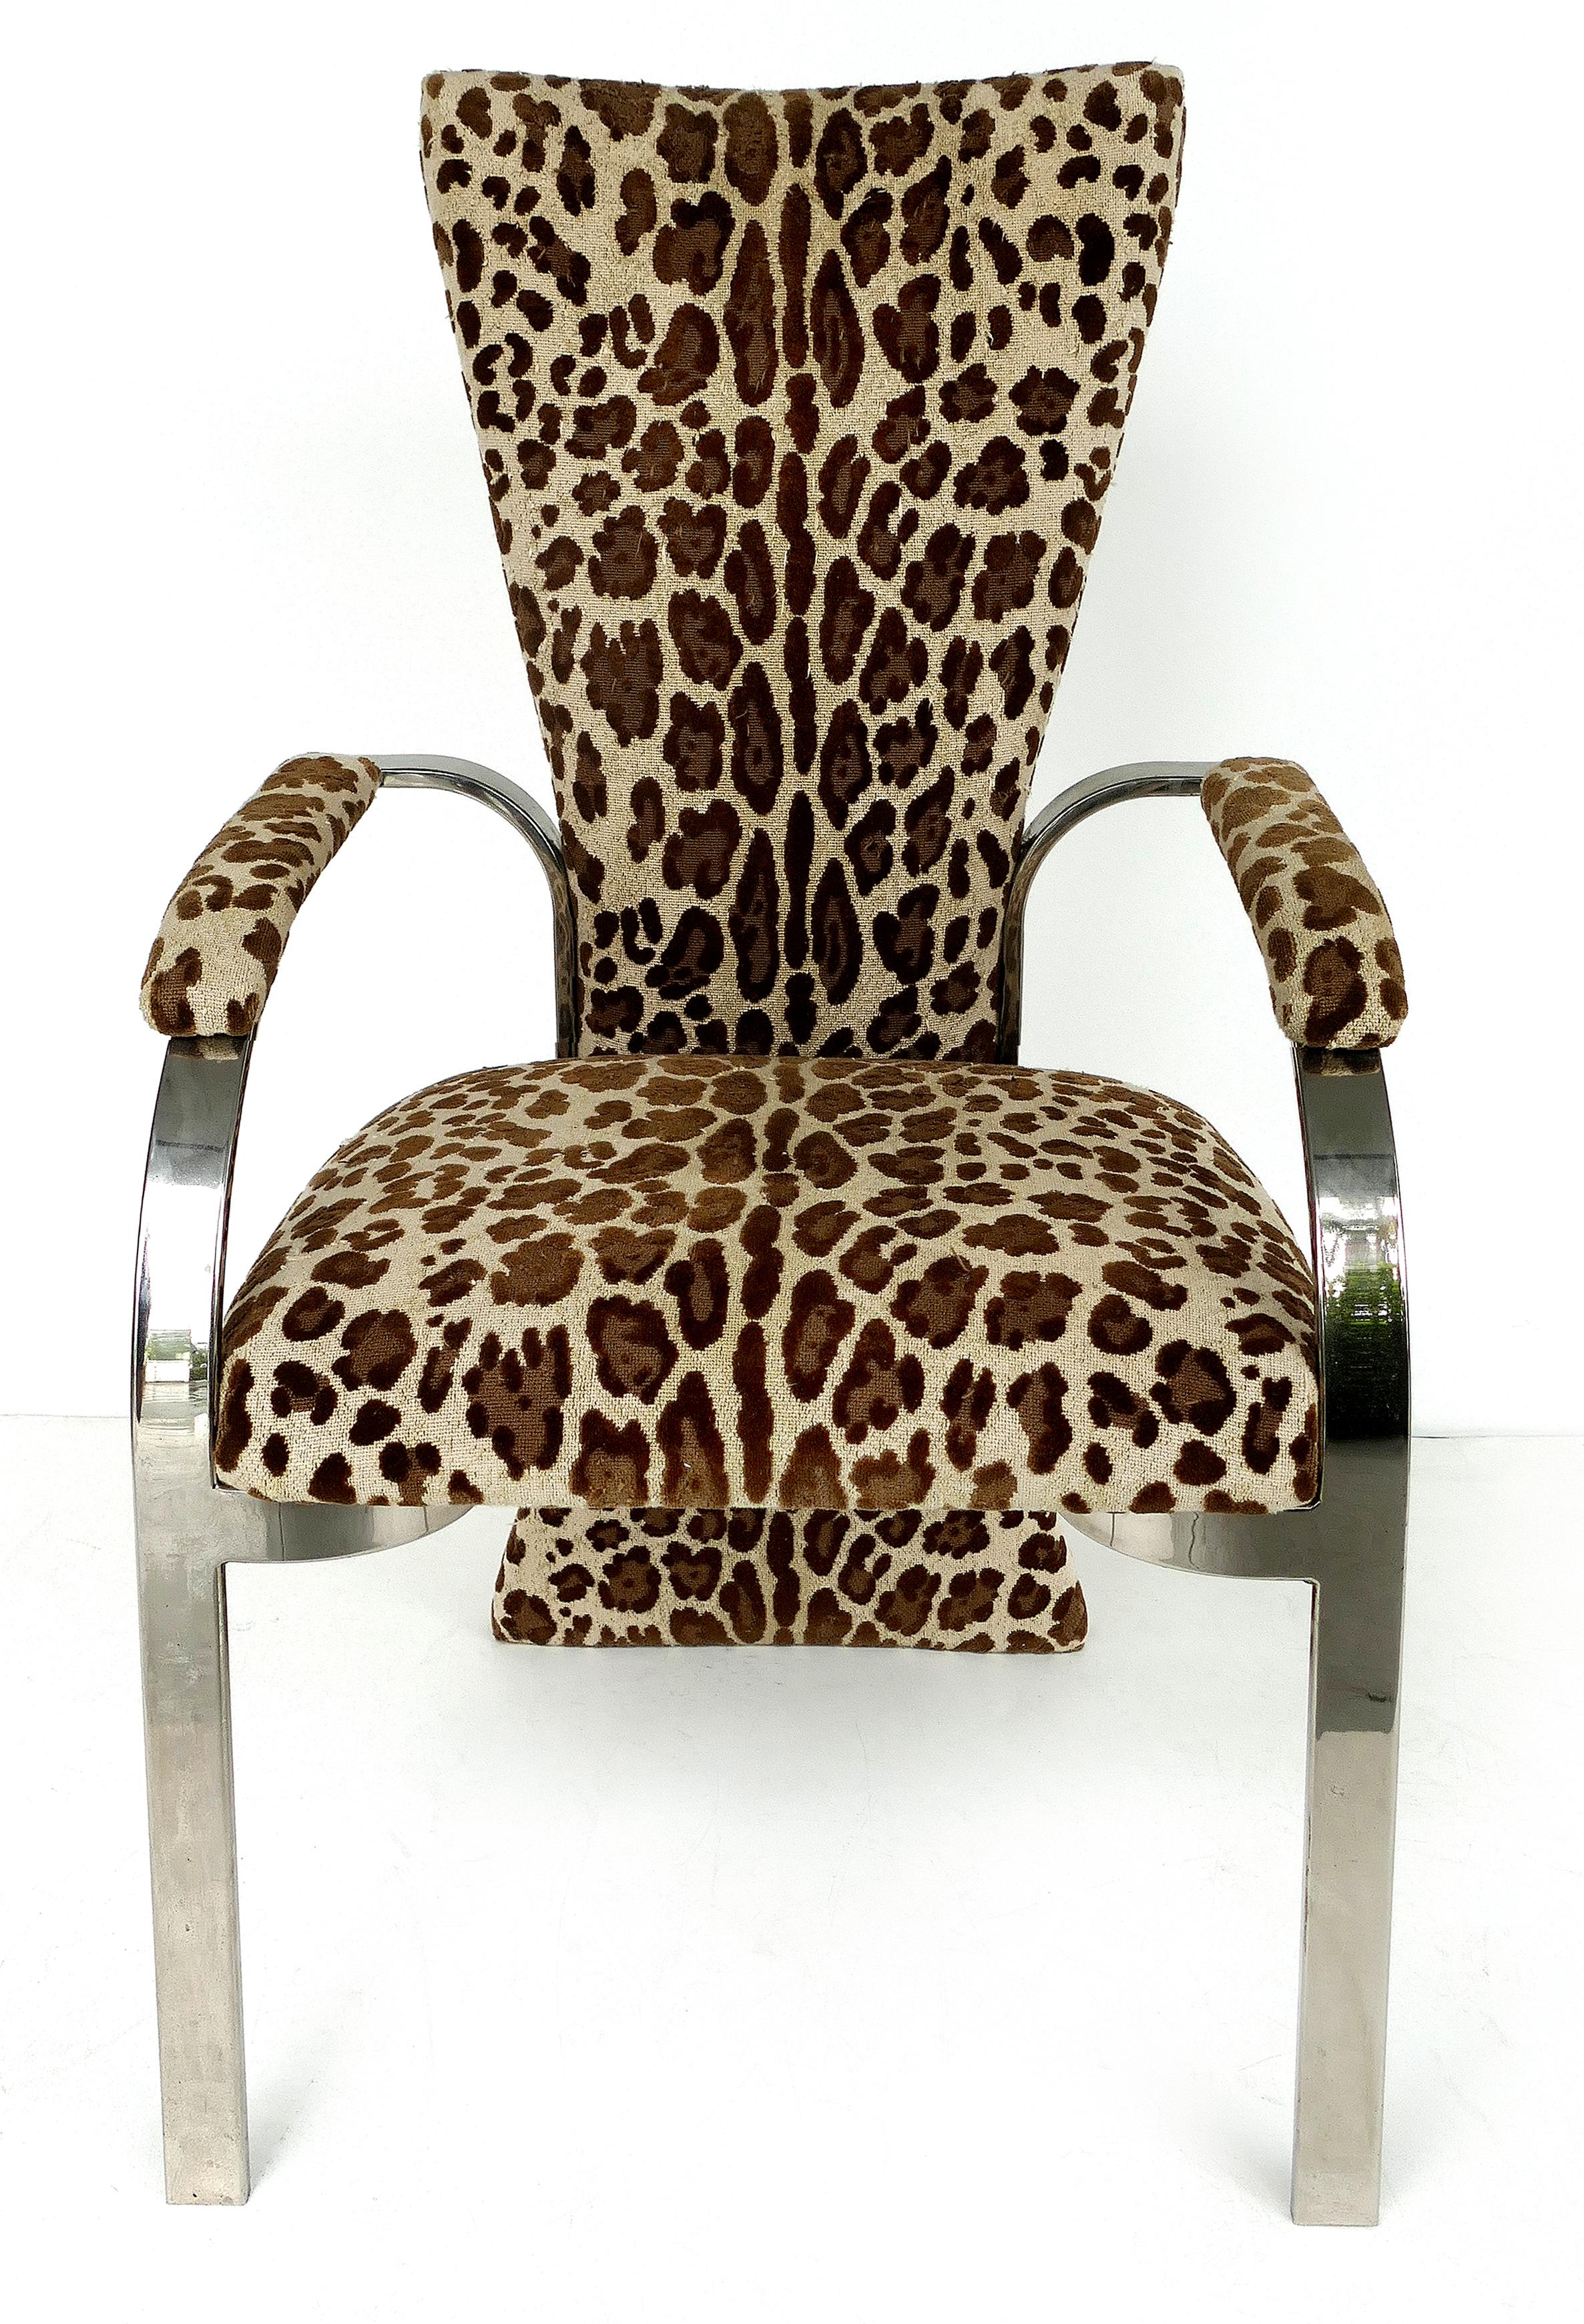 Stainless steel armchairs with leopard animal print upholstery

Offered for sale is a striking pair of upholstered armchairs with stainless steel frames and leopard animal print fabric. The chairs are substantial and quite dramatic. The chairs are